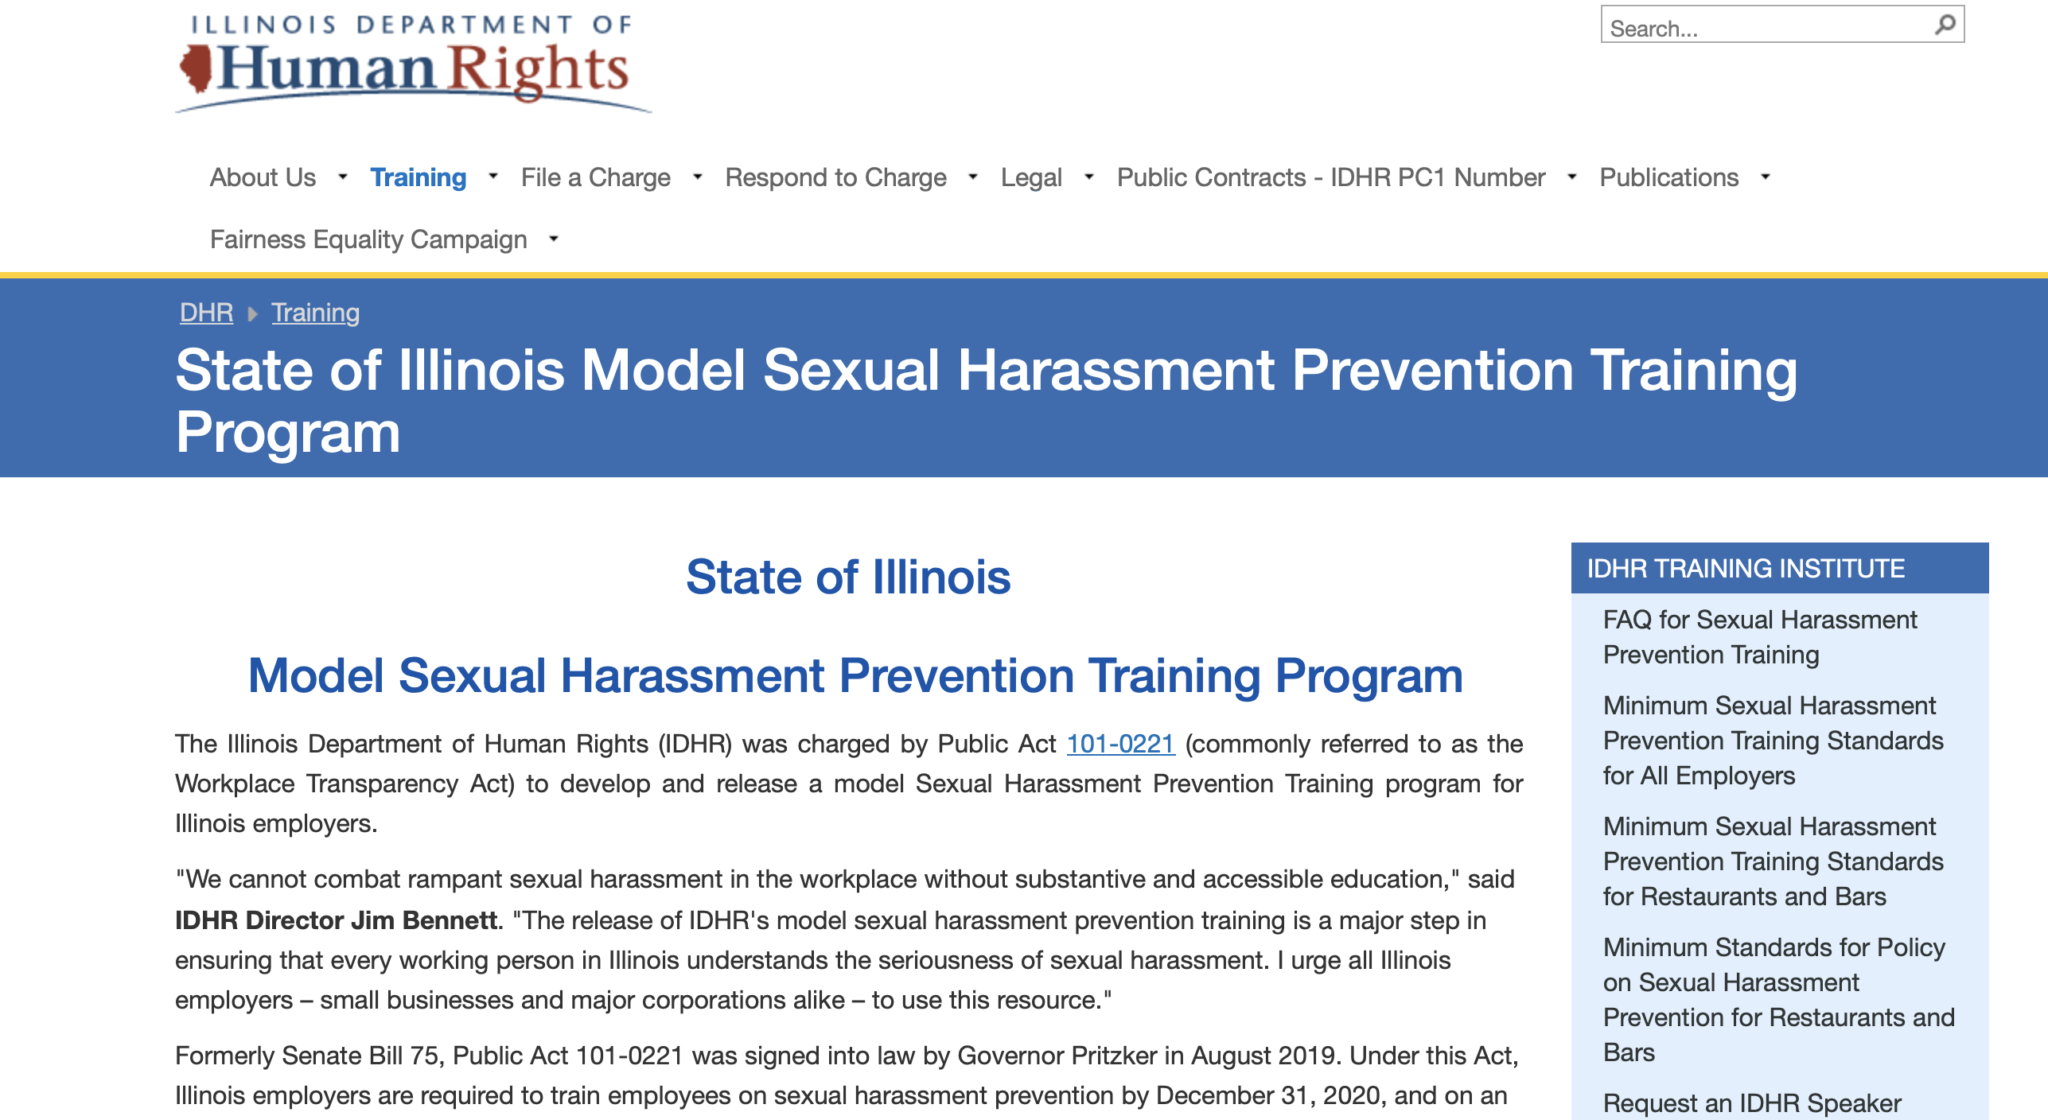 Minimum Sexual Harassment Prevention Training Standards For All 6428